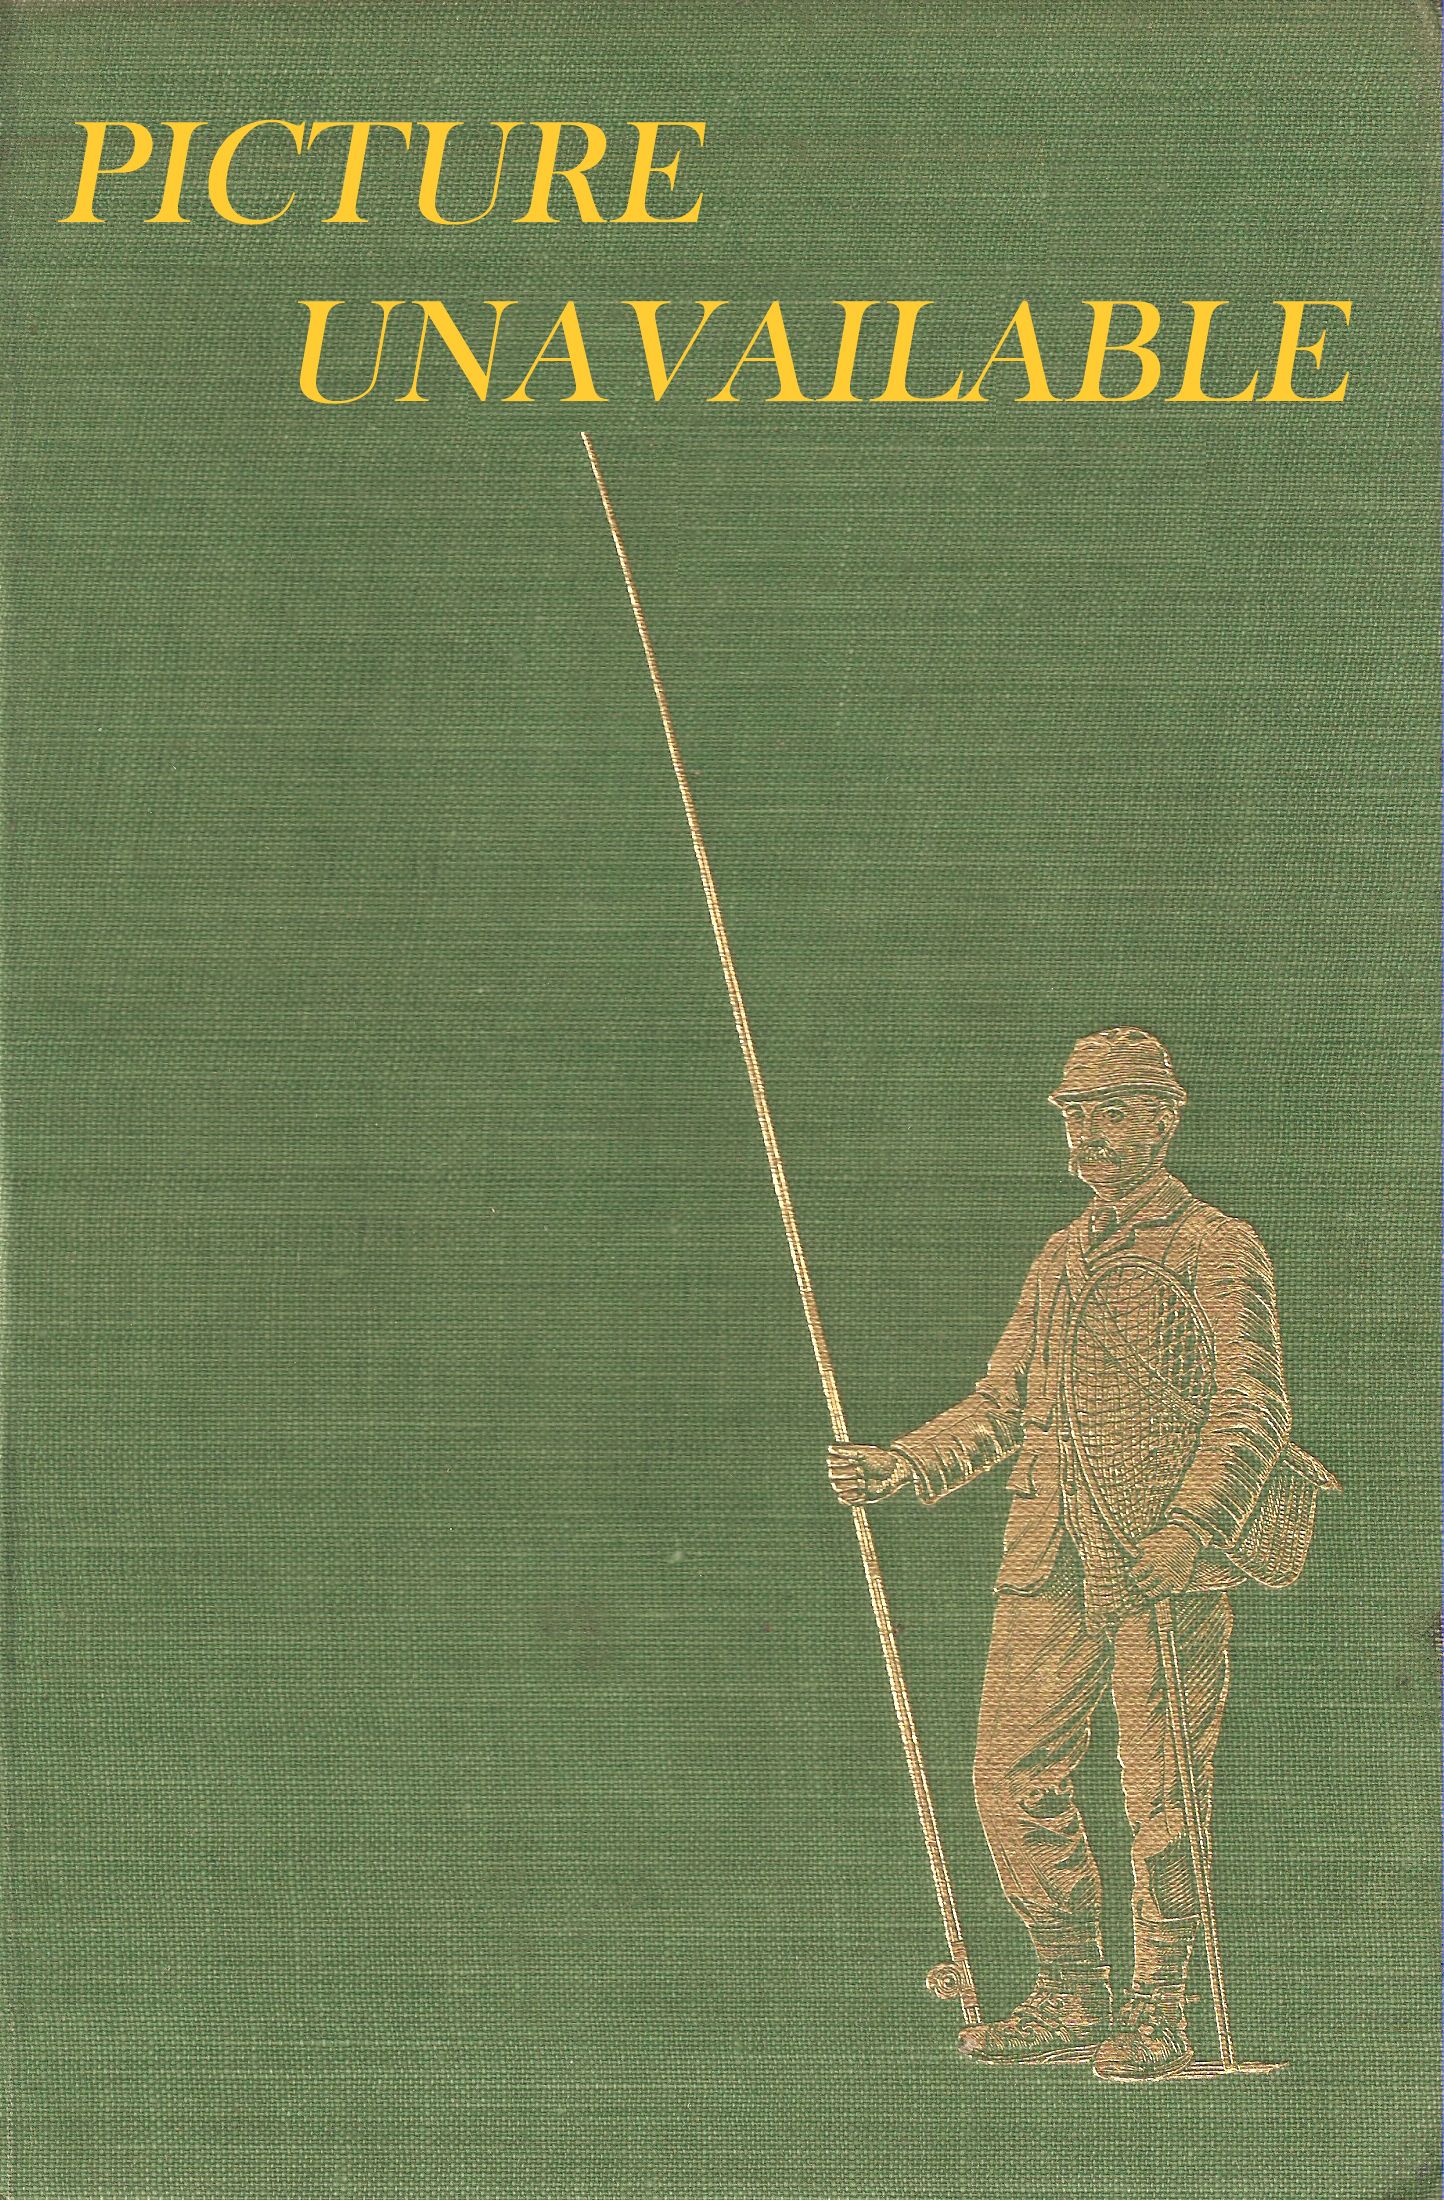 FISHING WITH MR. CRABTREE IN ALL WATERS. 1964 first edition.